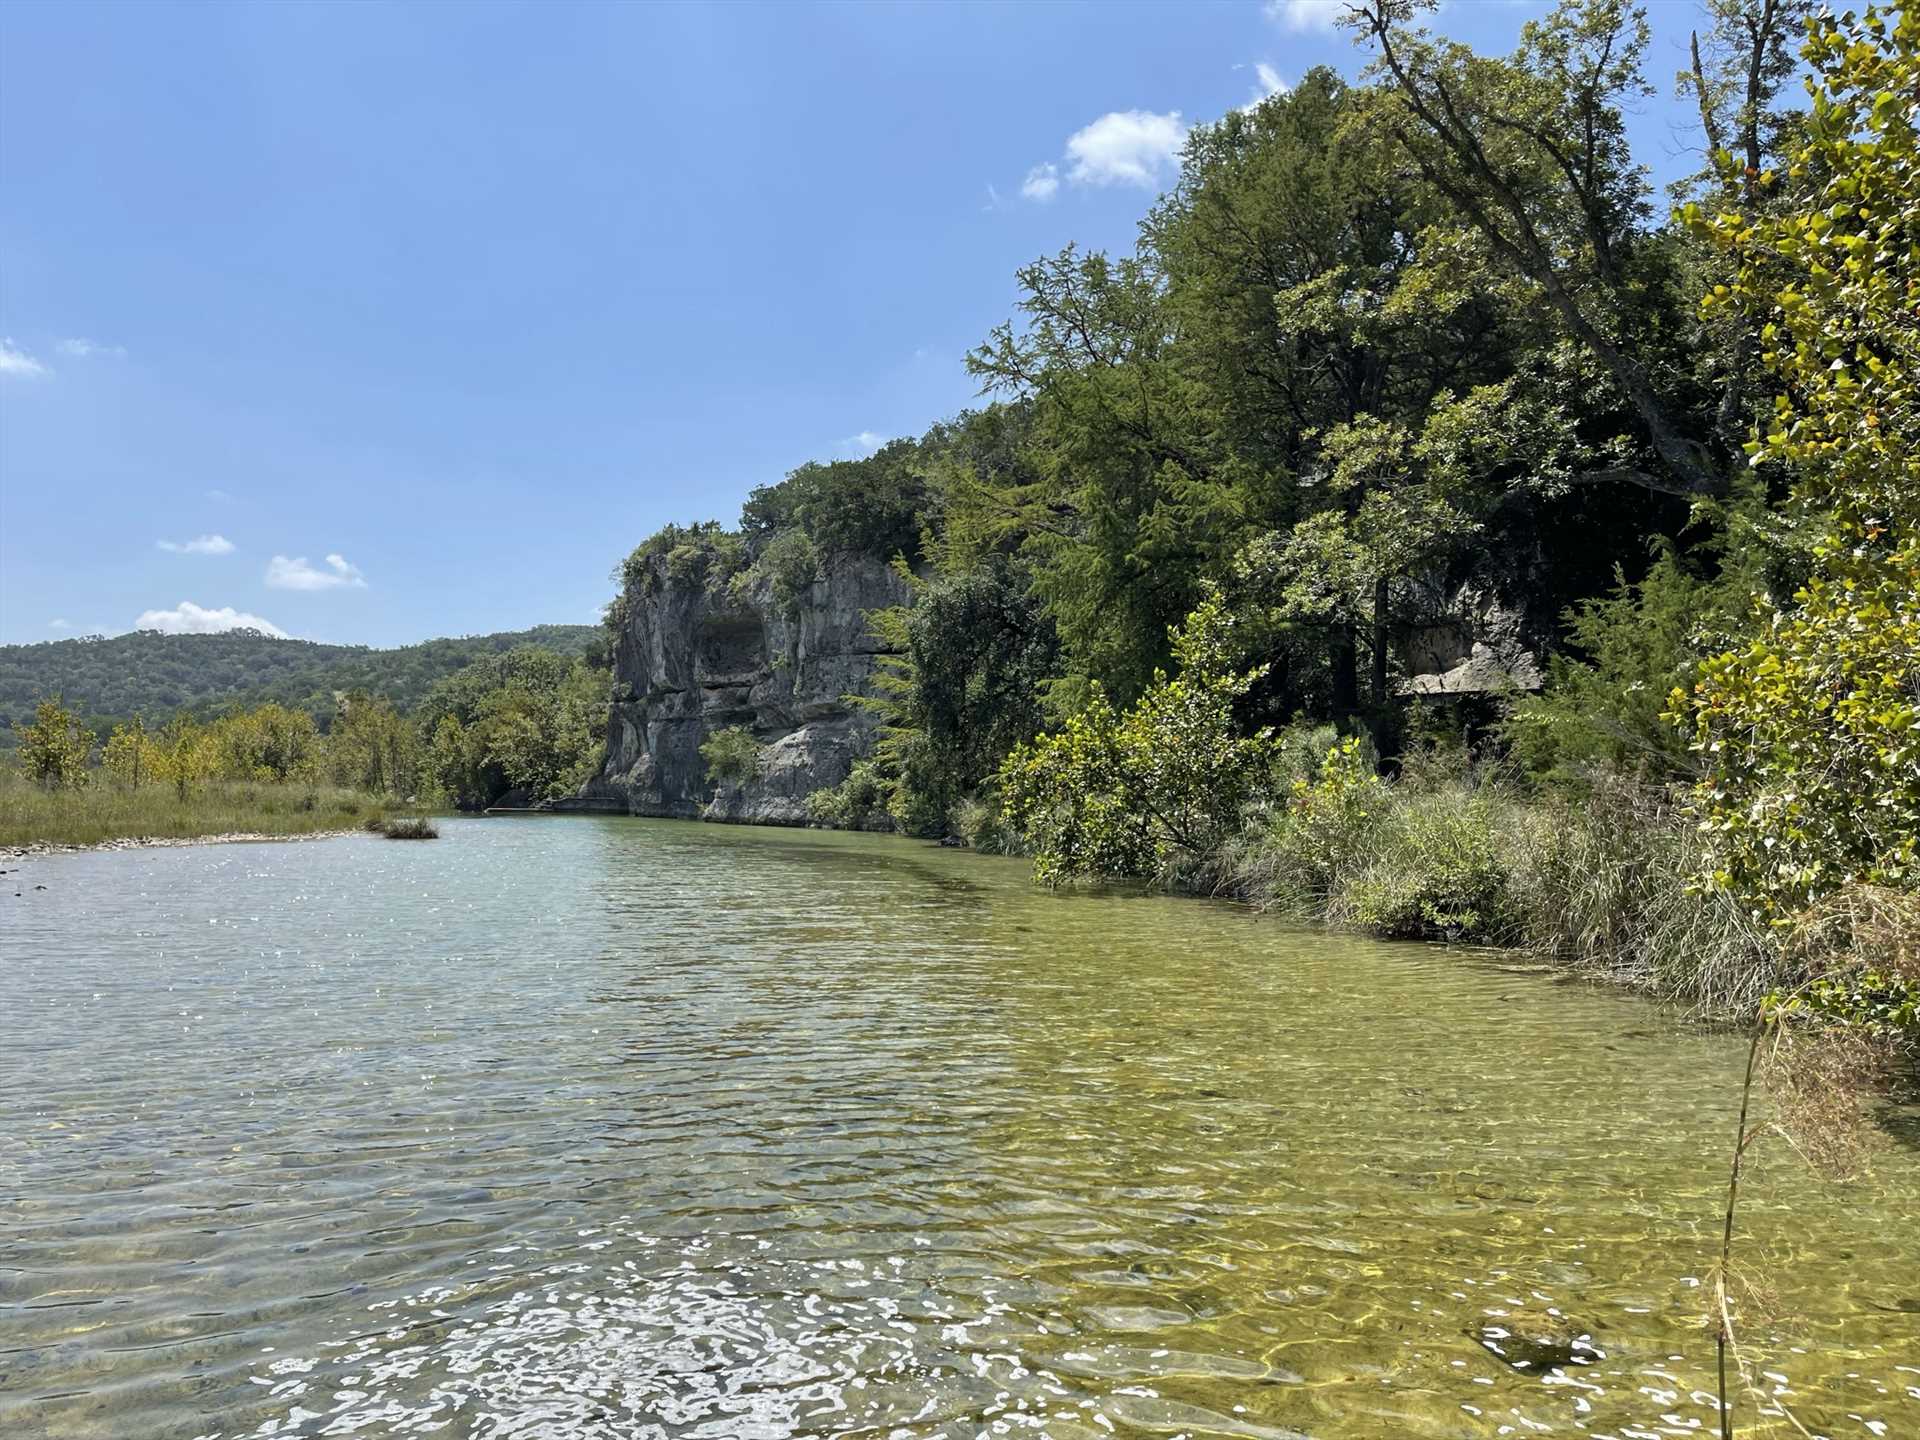                                                 This scenic stretch of the Dry Frio has been dammed to create a swimming hole just for our guests-and check out those amazing mountain views!